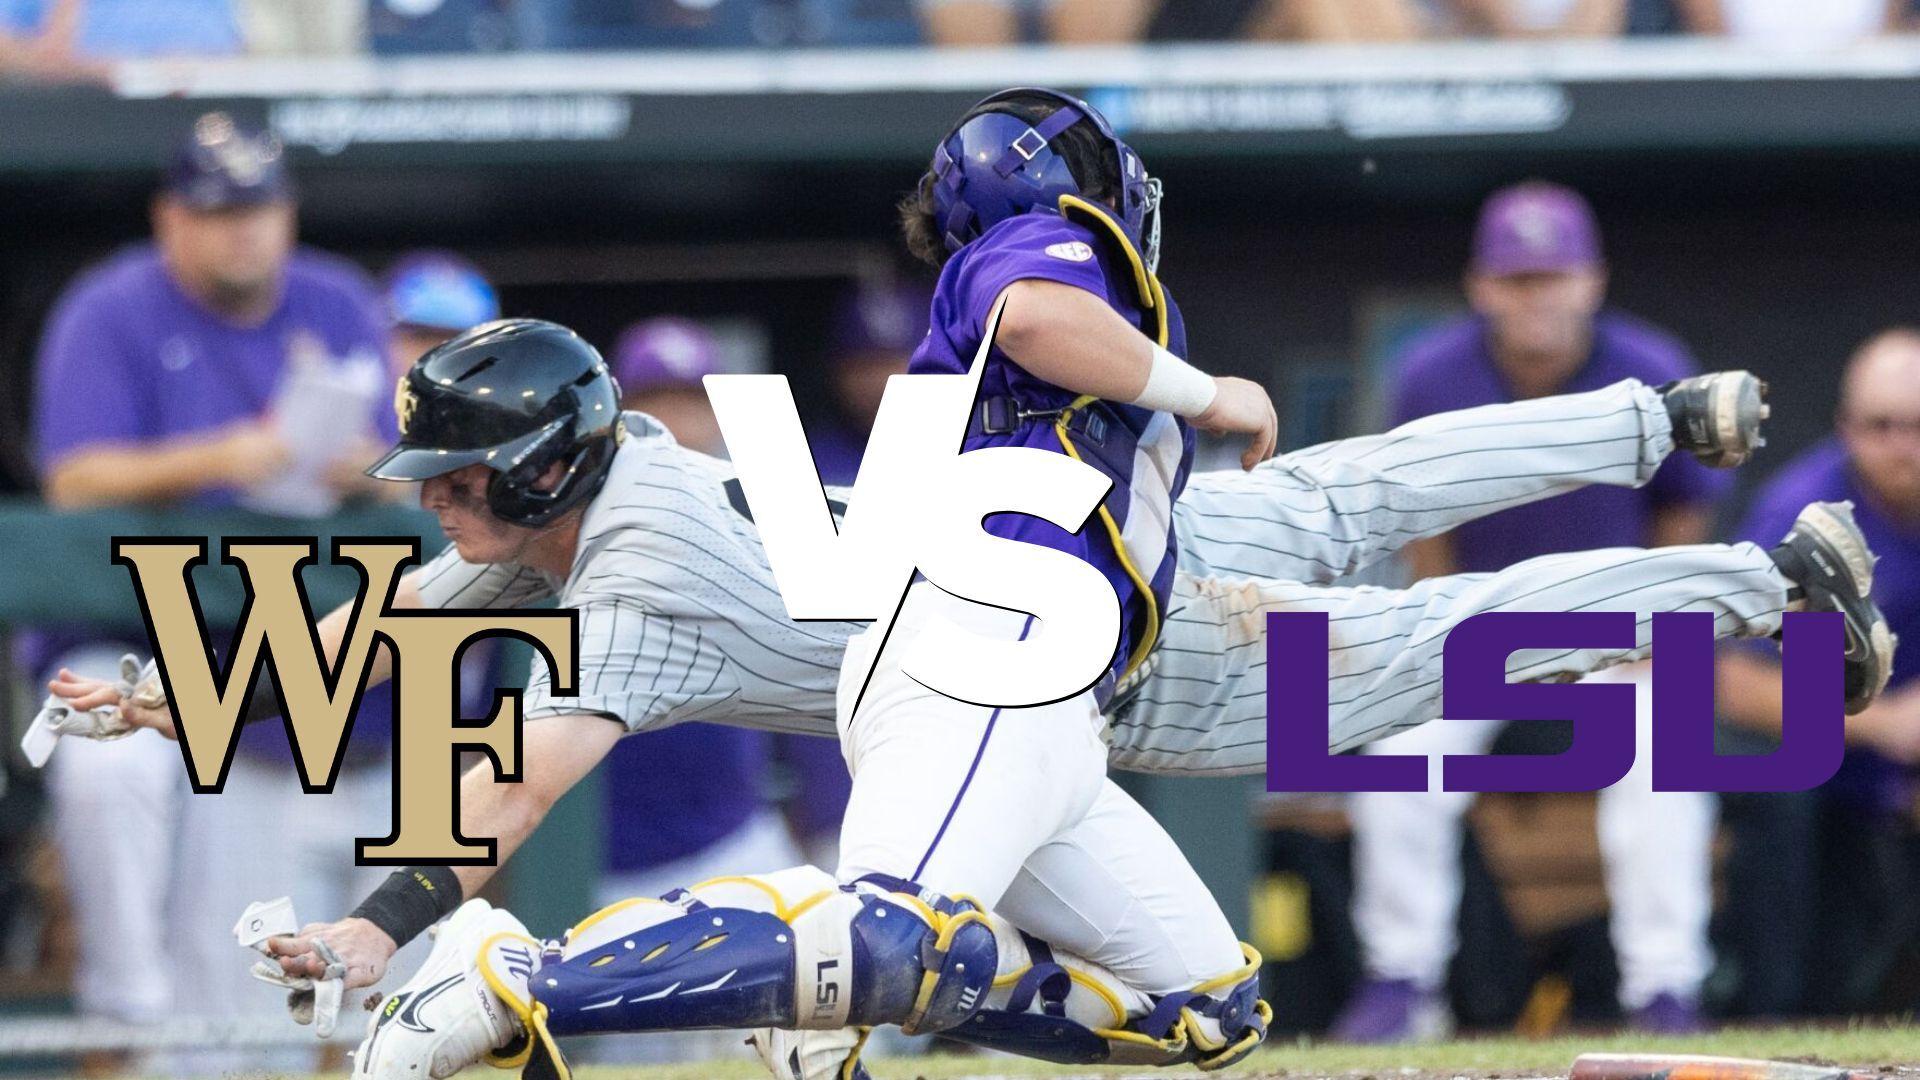 LSU's Tommy White hits walk-off home run in 11th inning to down Wake Forest  in CWS classic